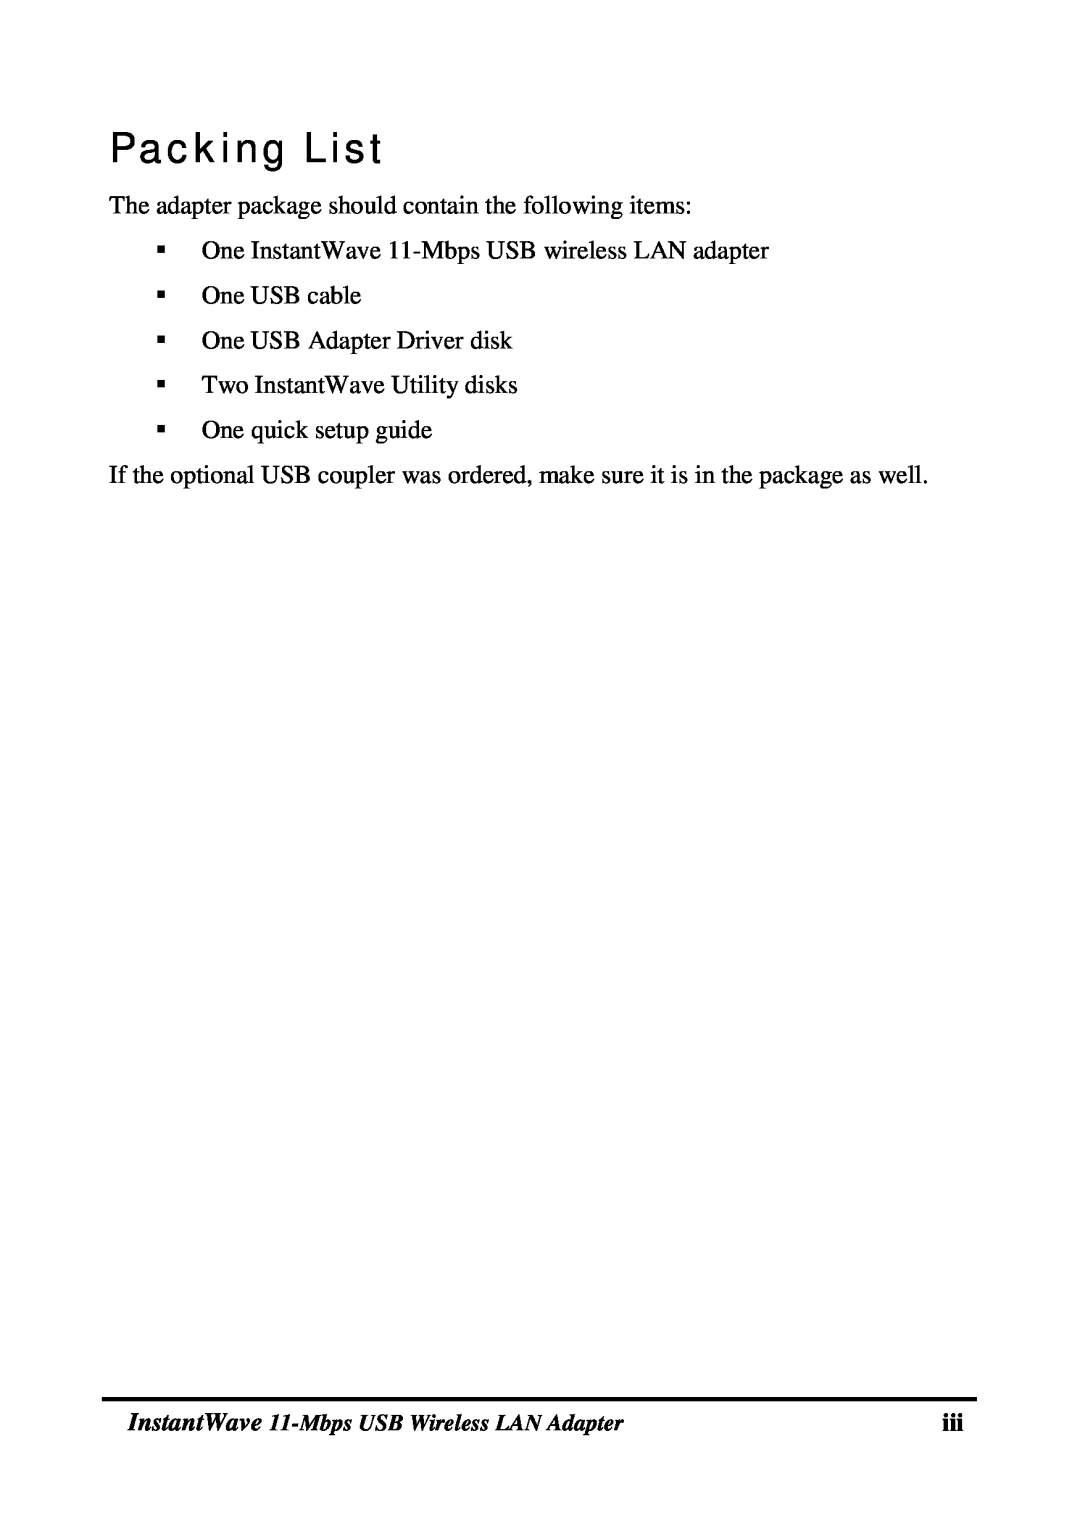 NDC comm NWH4020 manual Packing List, The adapter package should contain the following items 